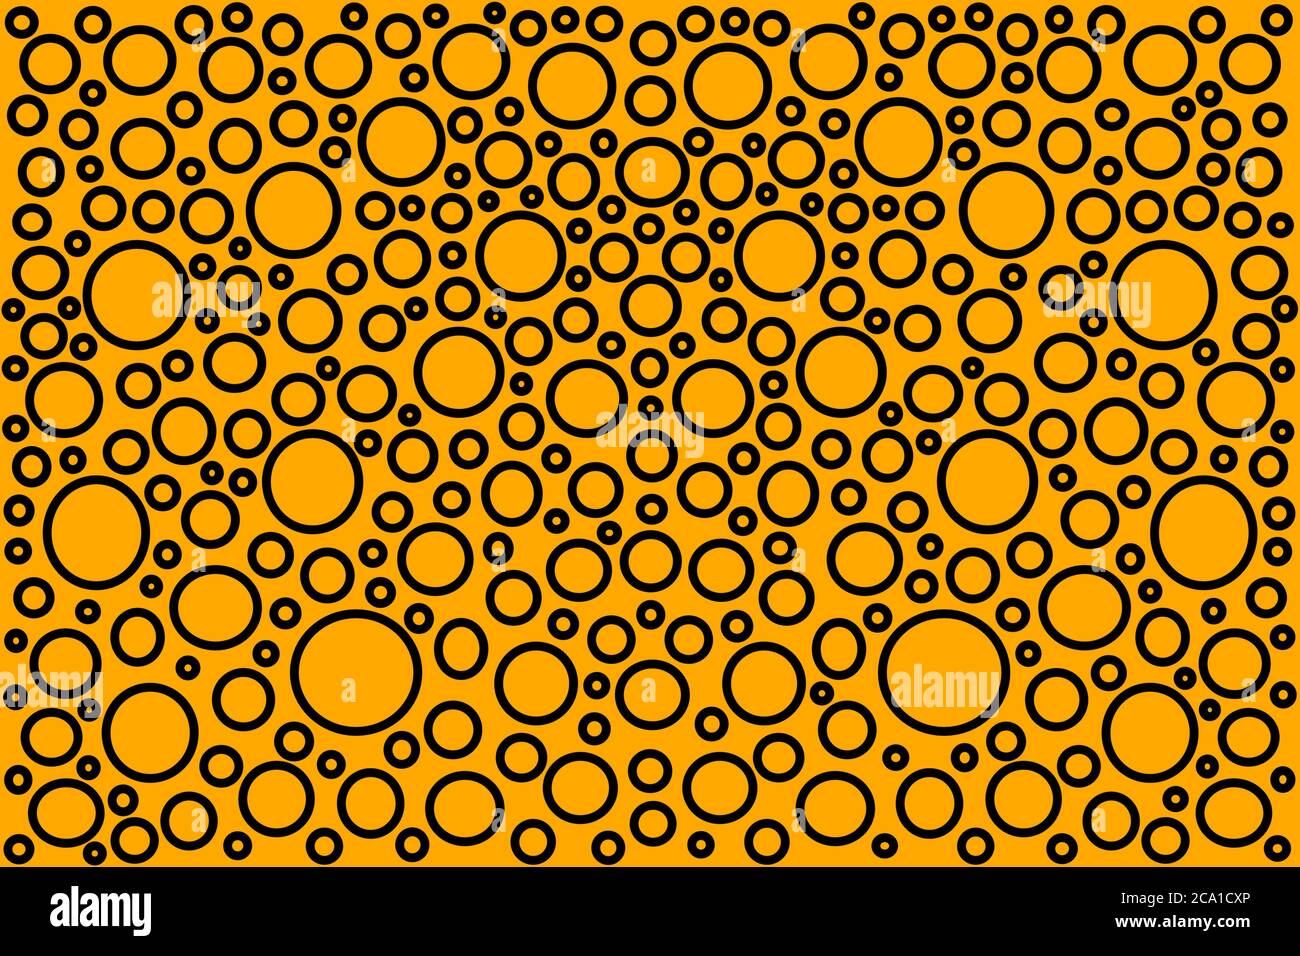 Black circles on orange background for packaging, fabric, wallpaper, textile material and print element, textile printing pattern Stock Photo